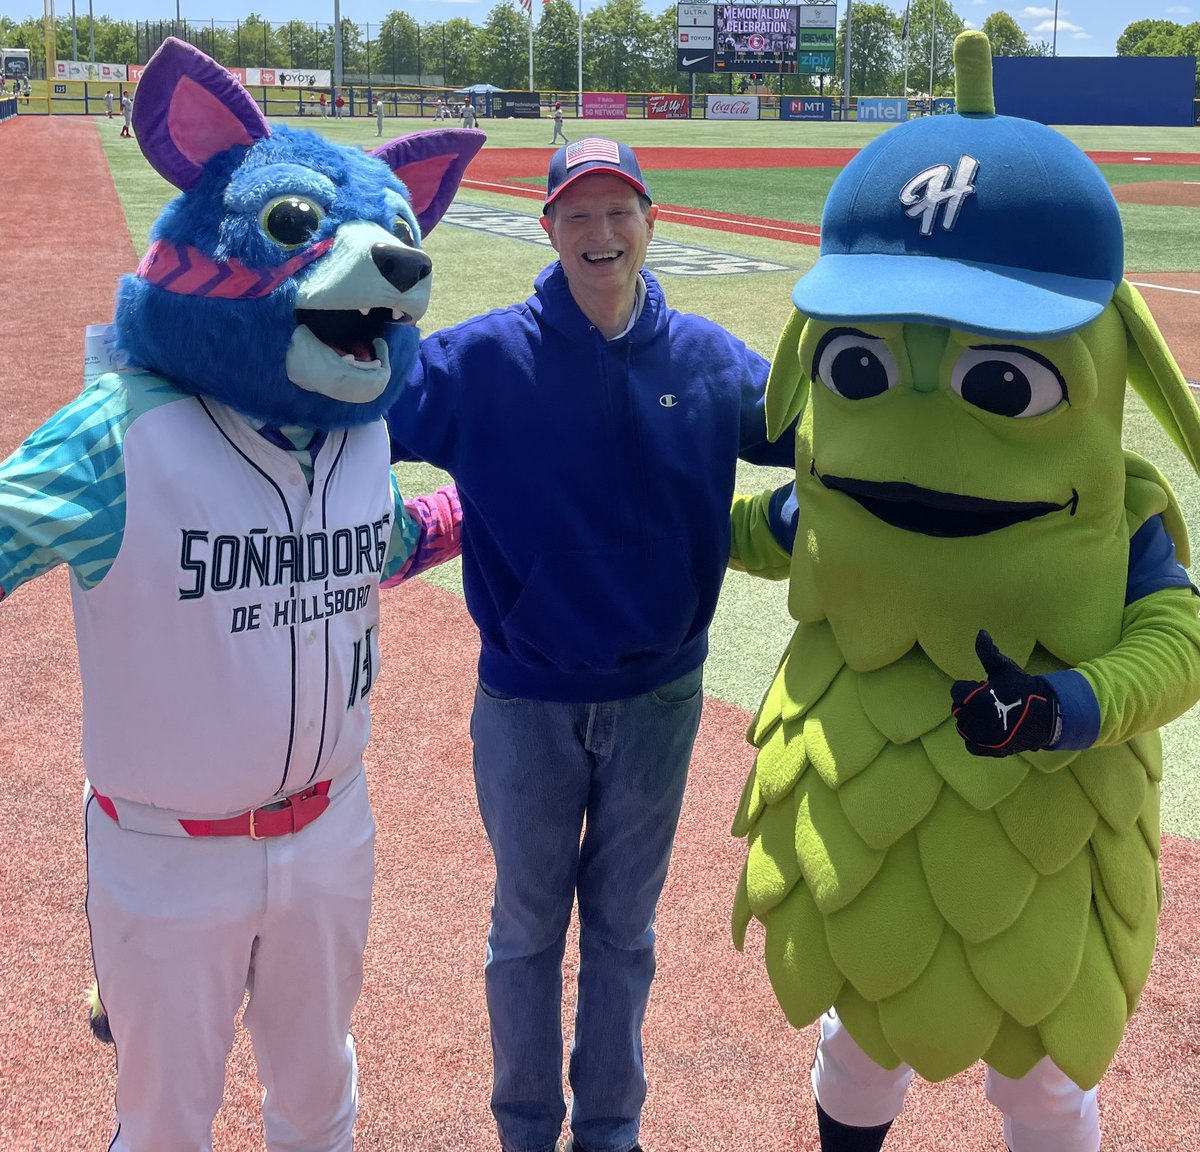 Thanks @HillsboroHops this #MemorialDay weekend for honoring those who made the ultimate sacrifice & for hosting today’s posthumous POW medal ceremony for the family of John Westran Sr. And huge thanks as well to Mayors @LaceyBeaty & @SteveCallaway2 for helping mark this day.